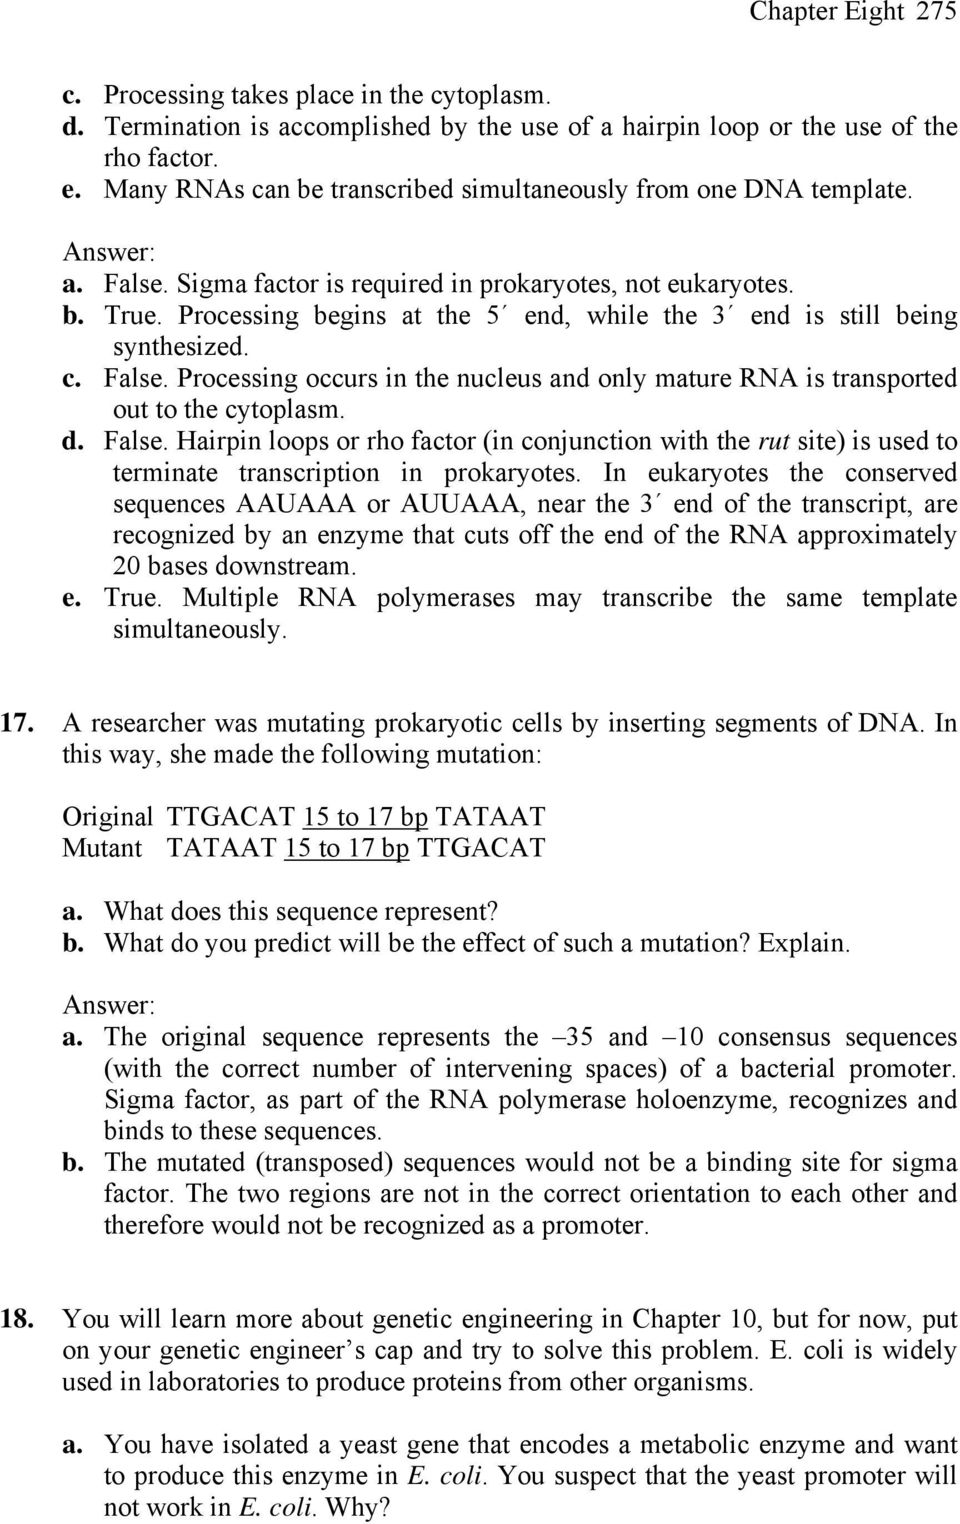 Processing begins at the 5 end, while the 3 end is still being synthesized. c. False. Processing occurs in the nucleus and only mature RNA is transported out to the cytoplasm. d. False. Hairpin loops or rho factor (in conjunction with the rut site) is used to terminate transcription in prokaryotes.